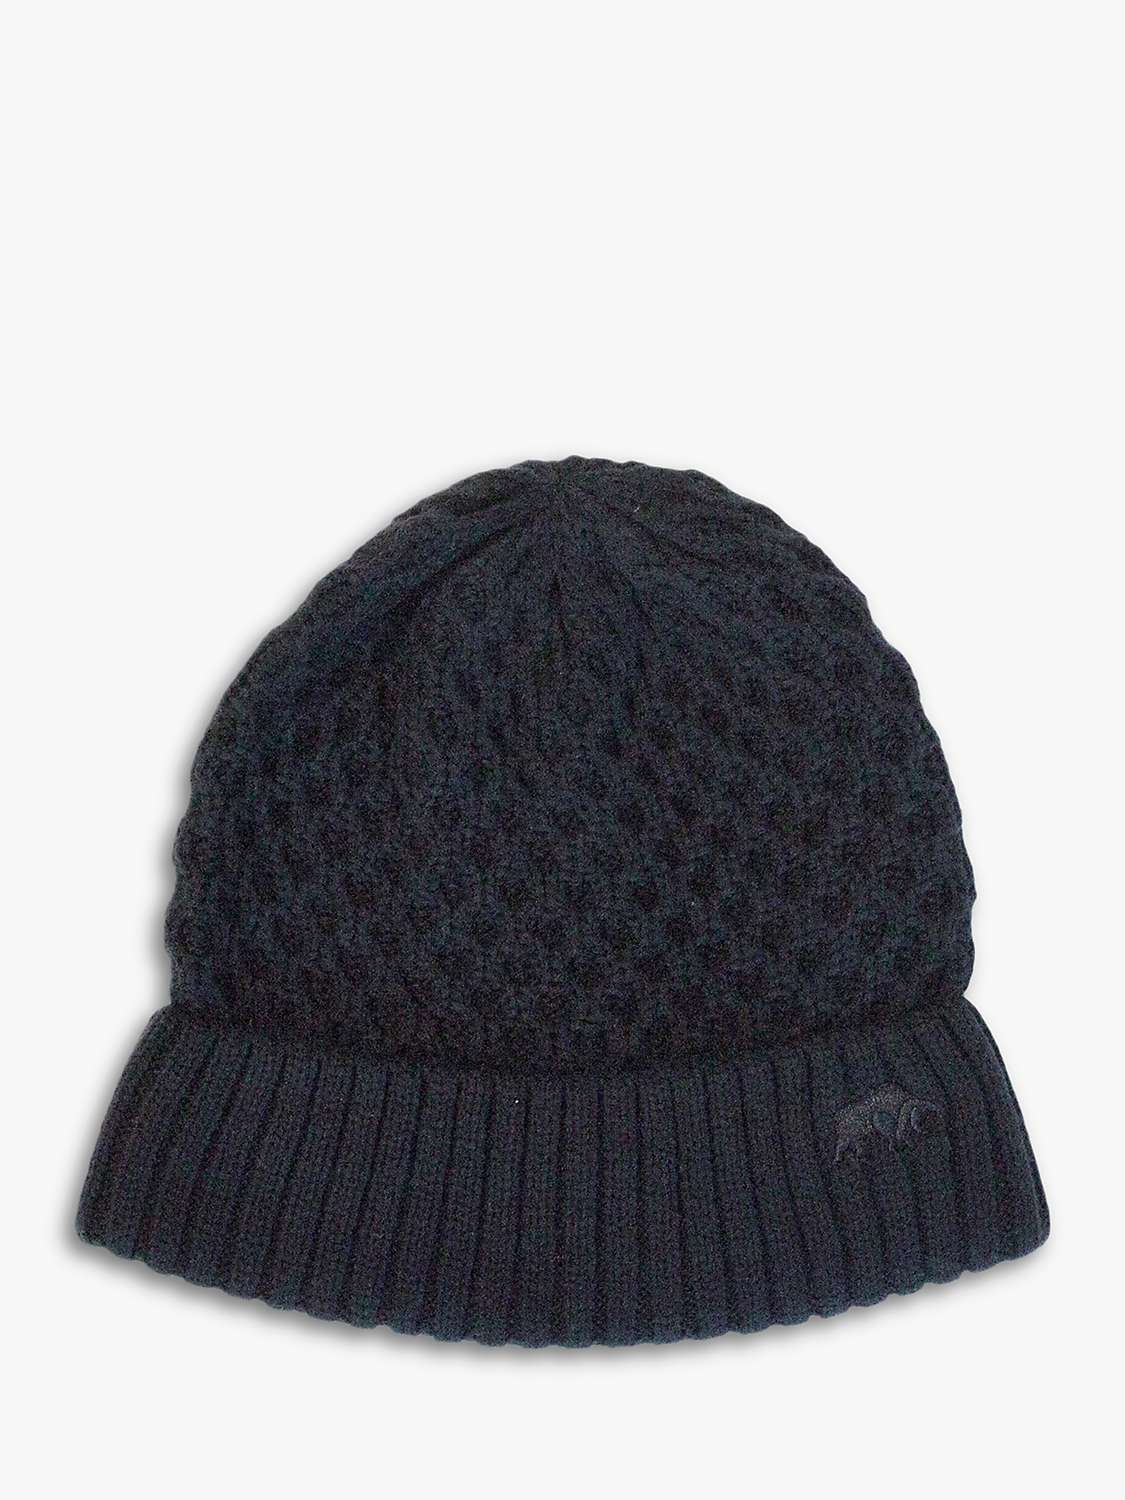 Buy Raging Bull Cable Knit Beanie Online at johnlewis.com